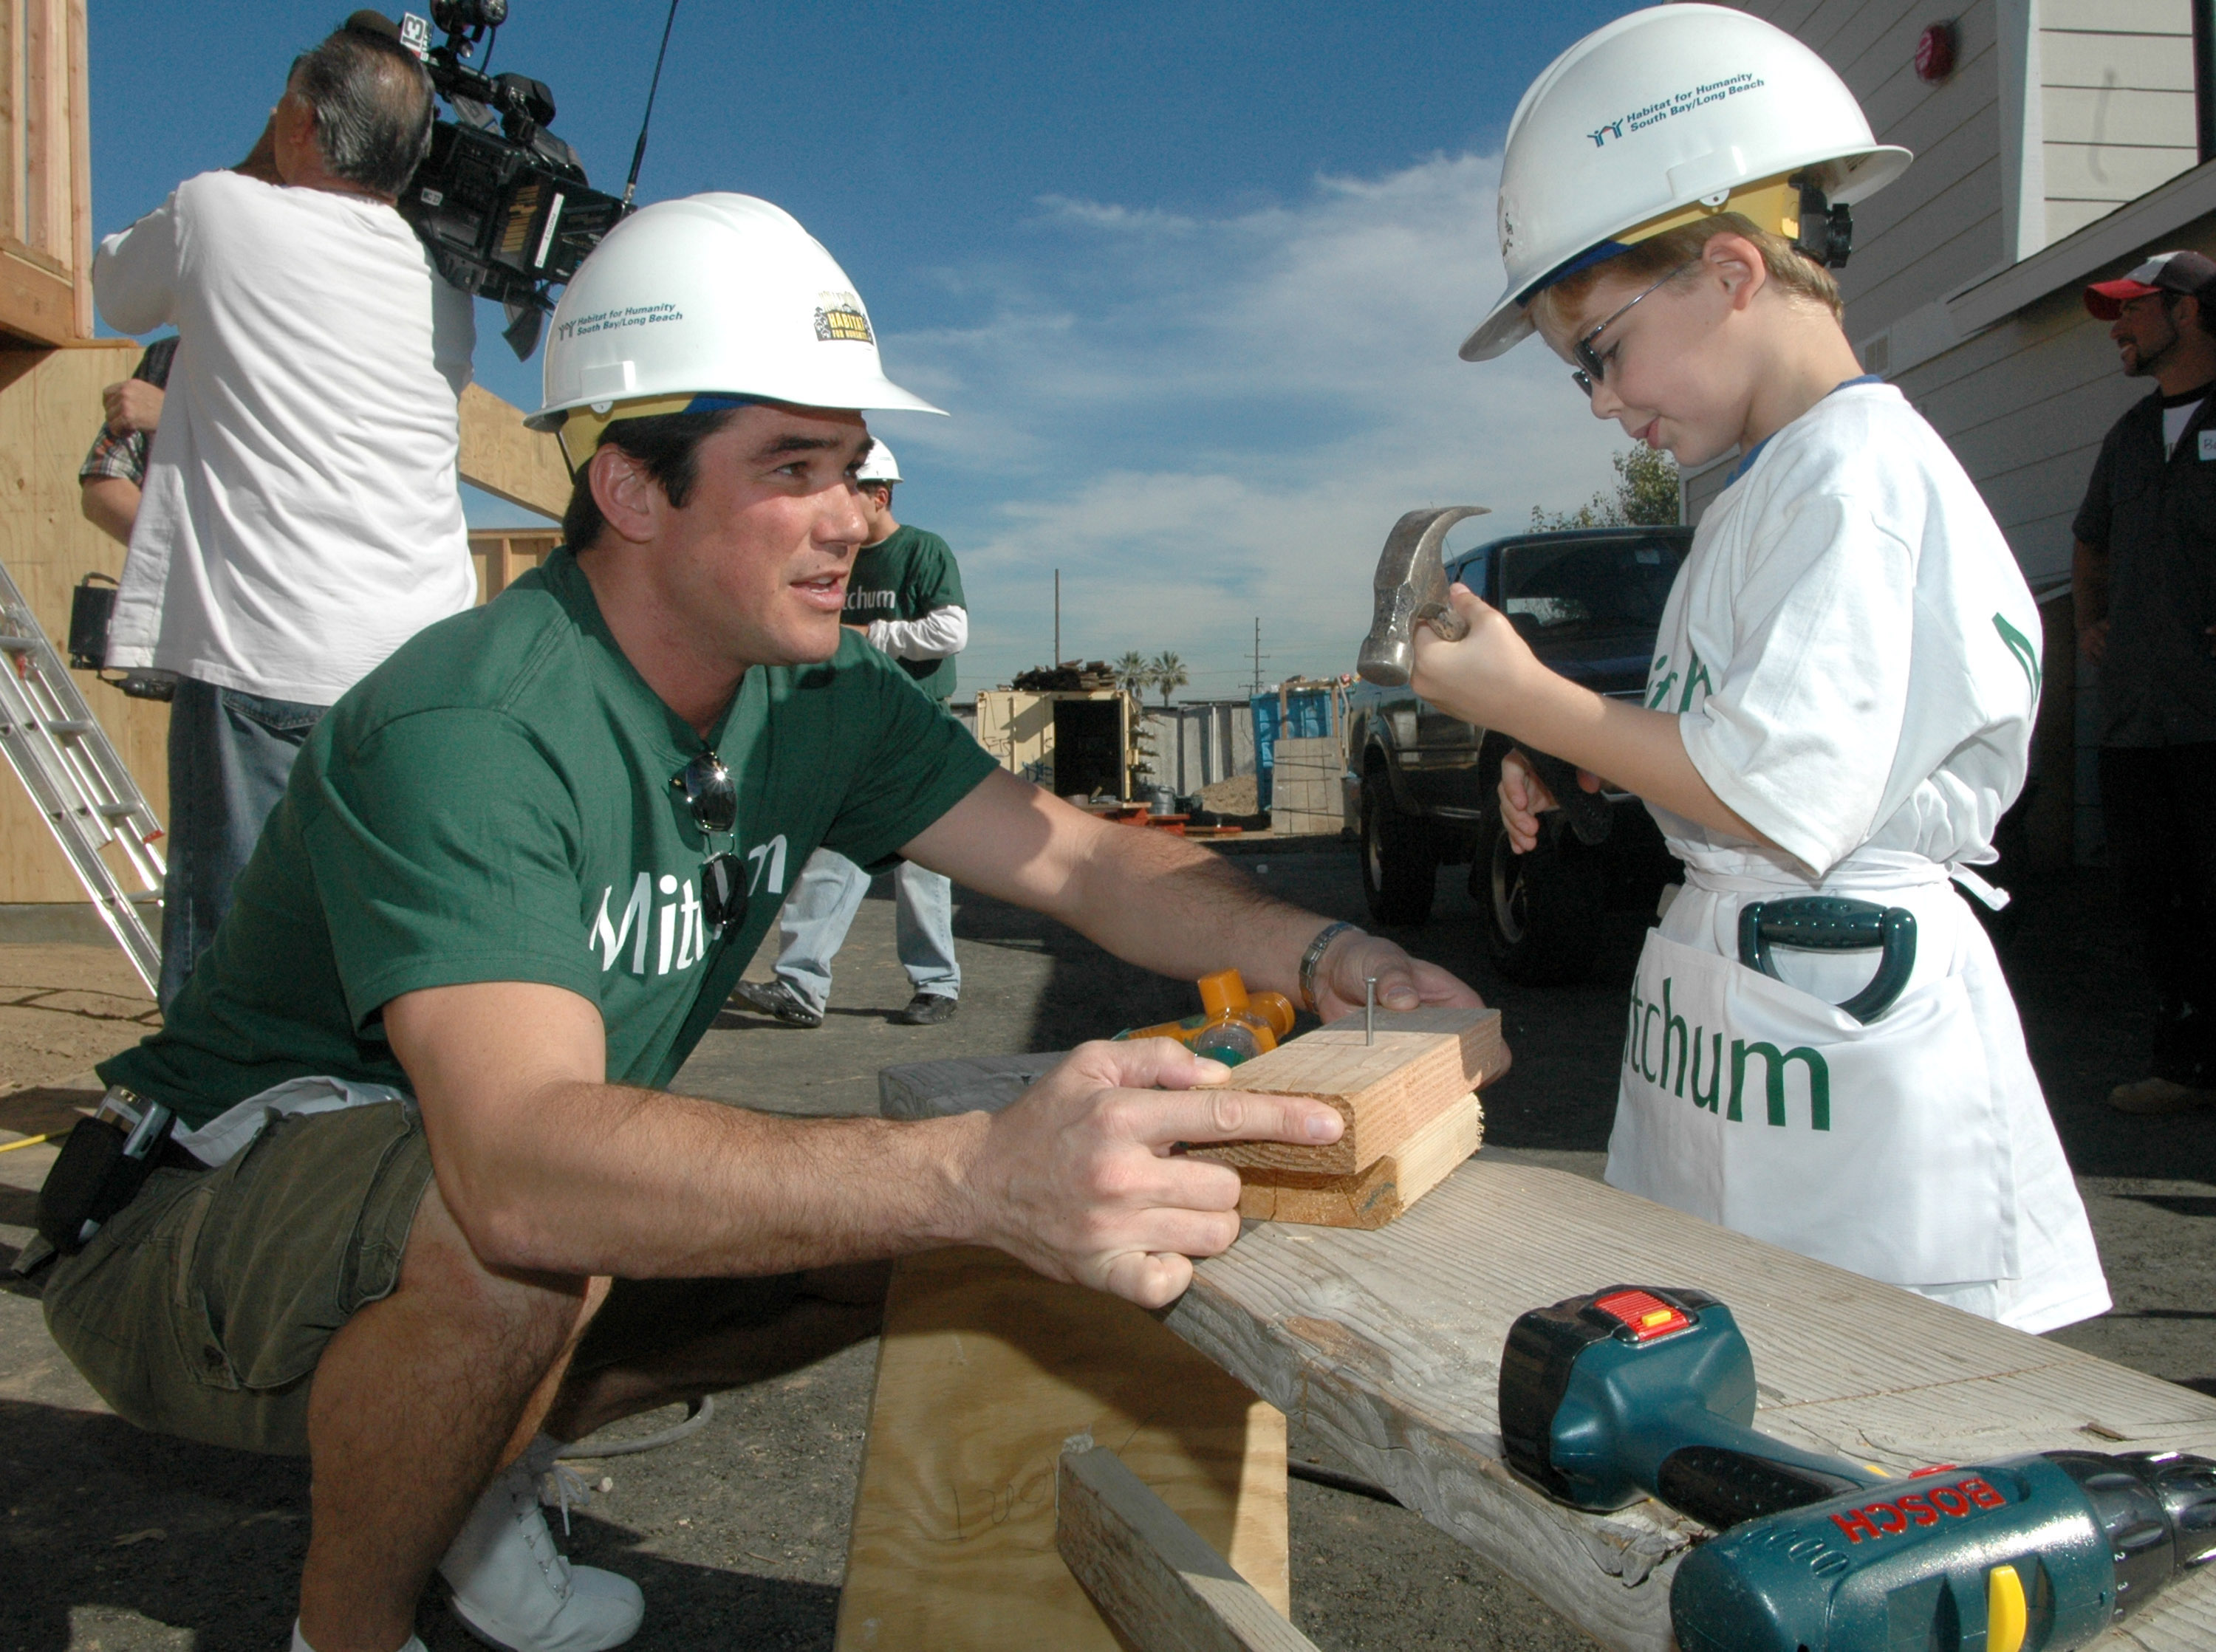 Dean Cain and his son helping on a project for Habitat for Humanity's "Sweet-Equity" Home at Plaza Del Amo in Torrance, California | Source: Getty Images